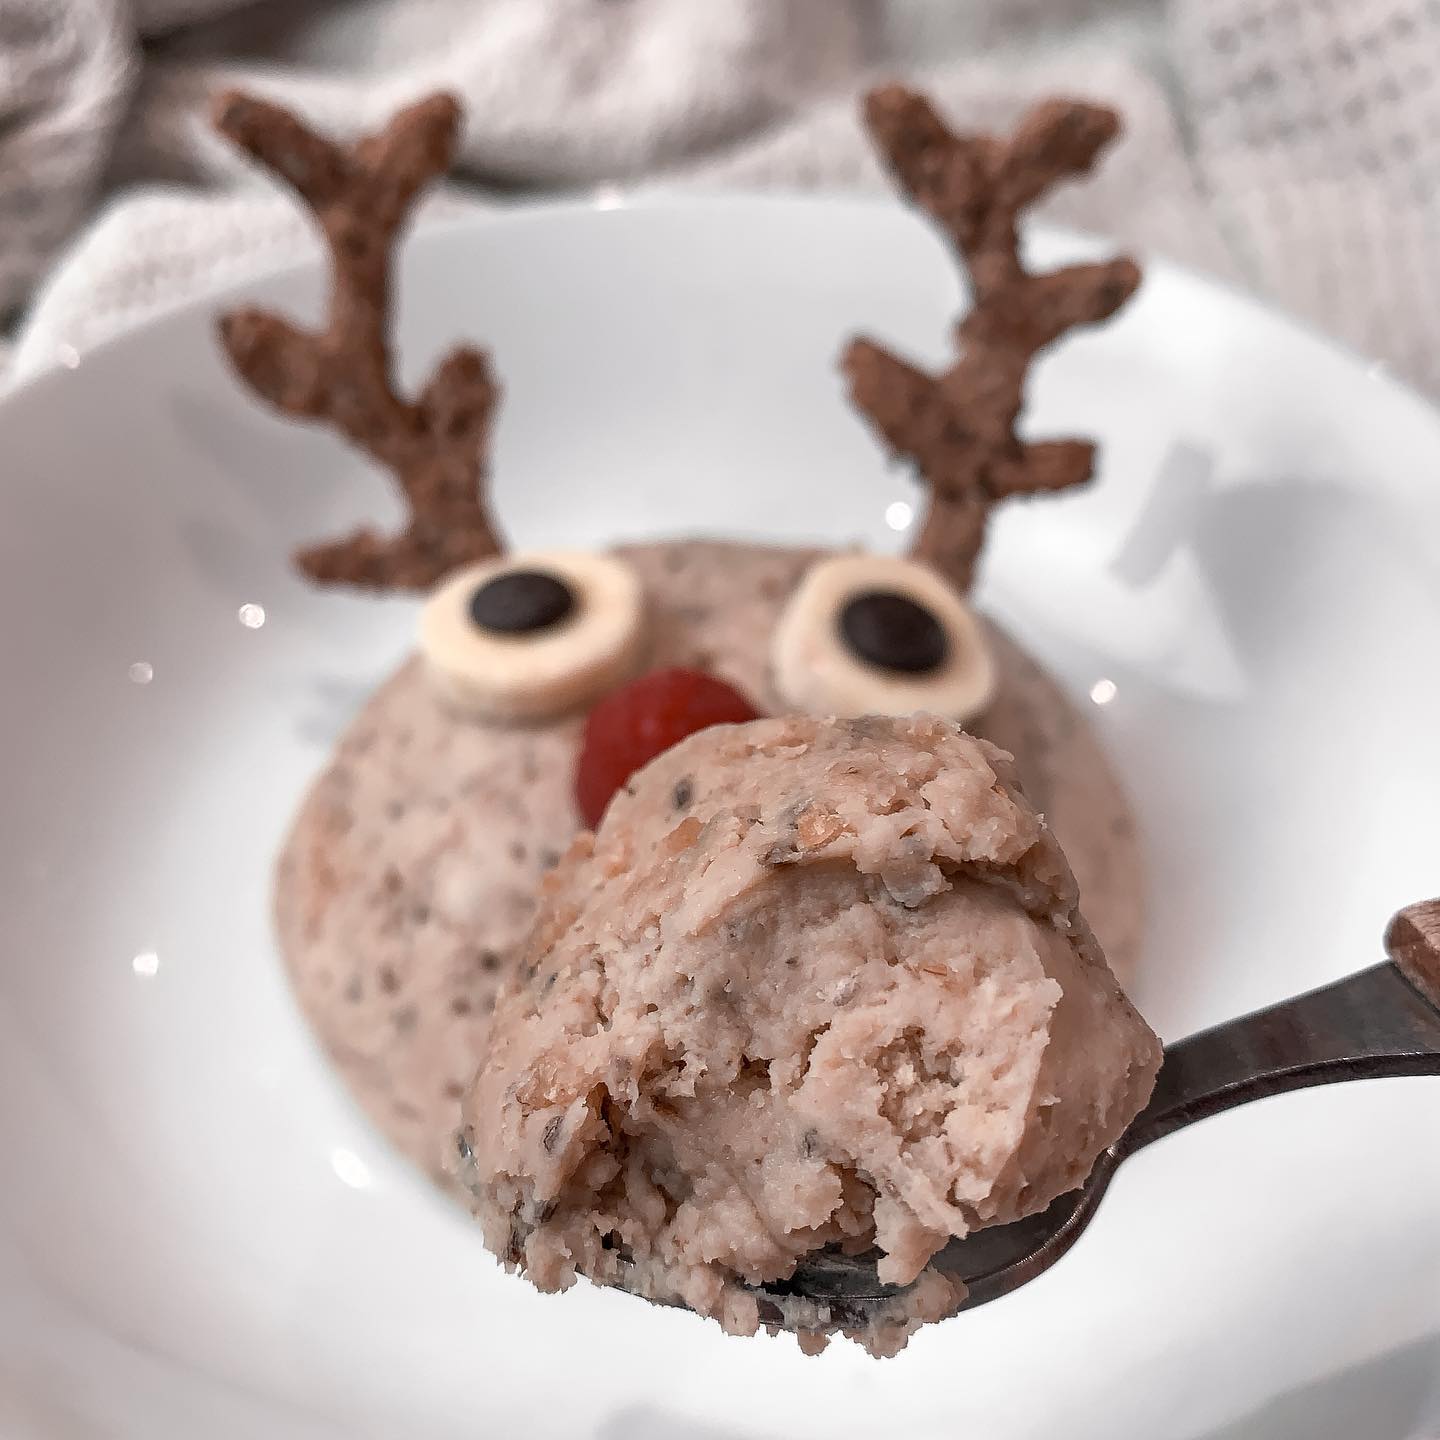 Reindeer Overnight Oat Cake with Homemade Gingerbread Antlers